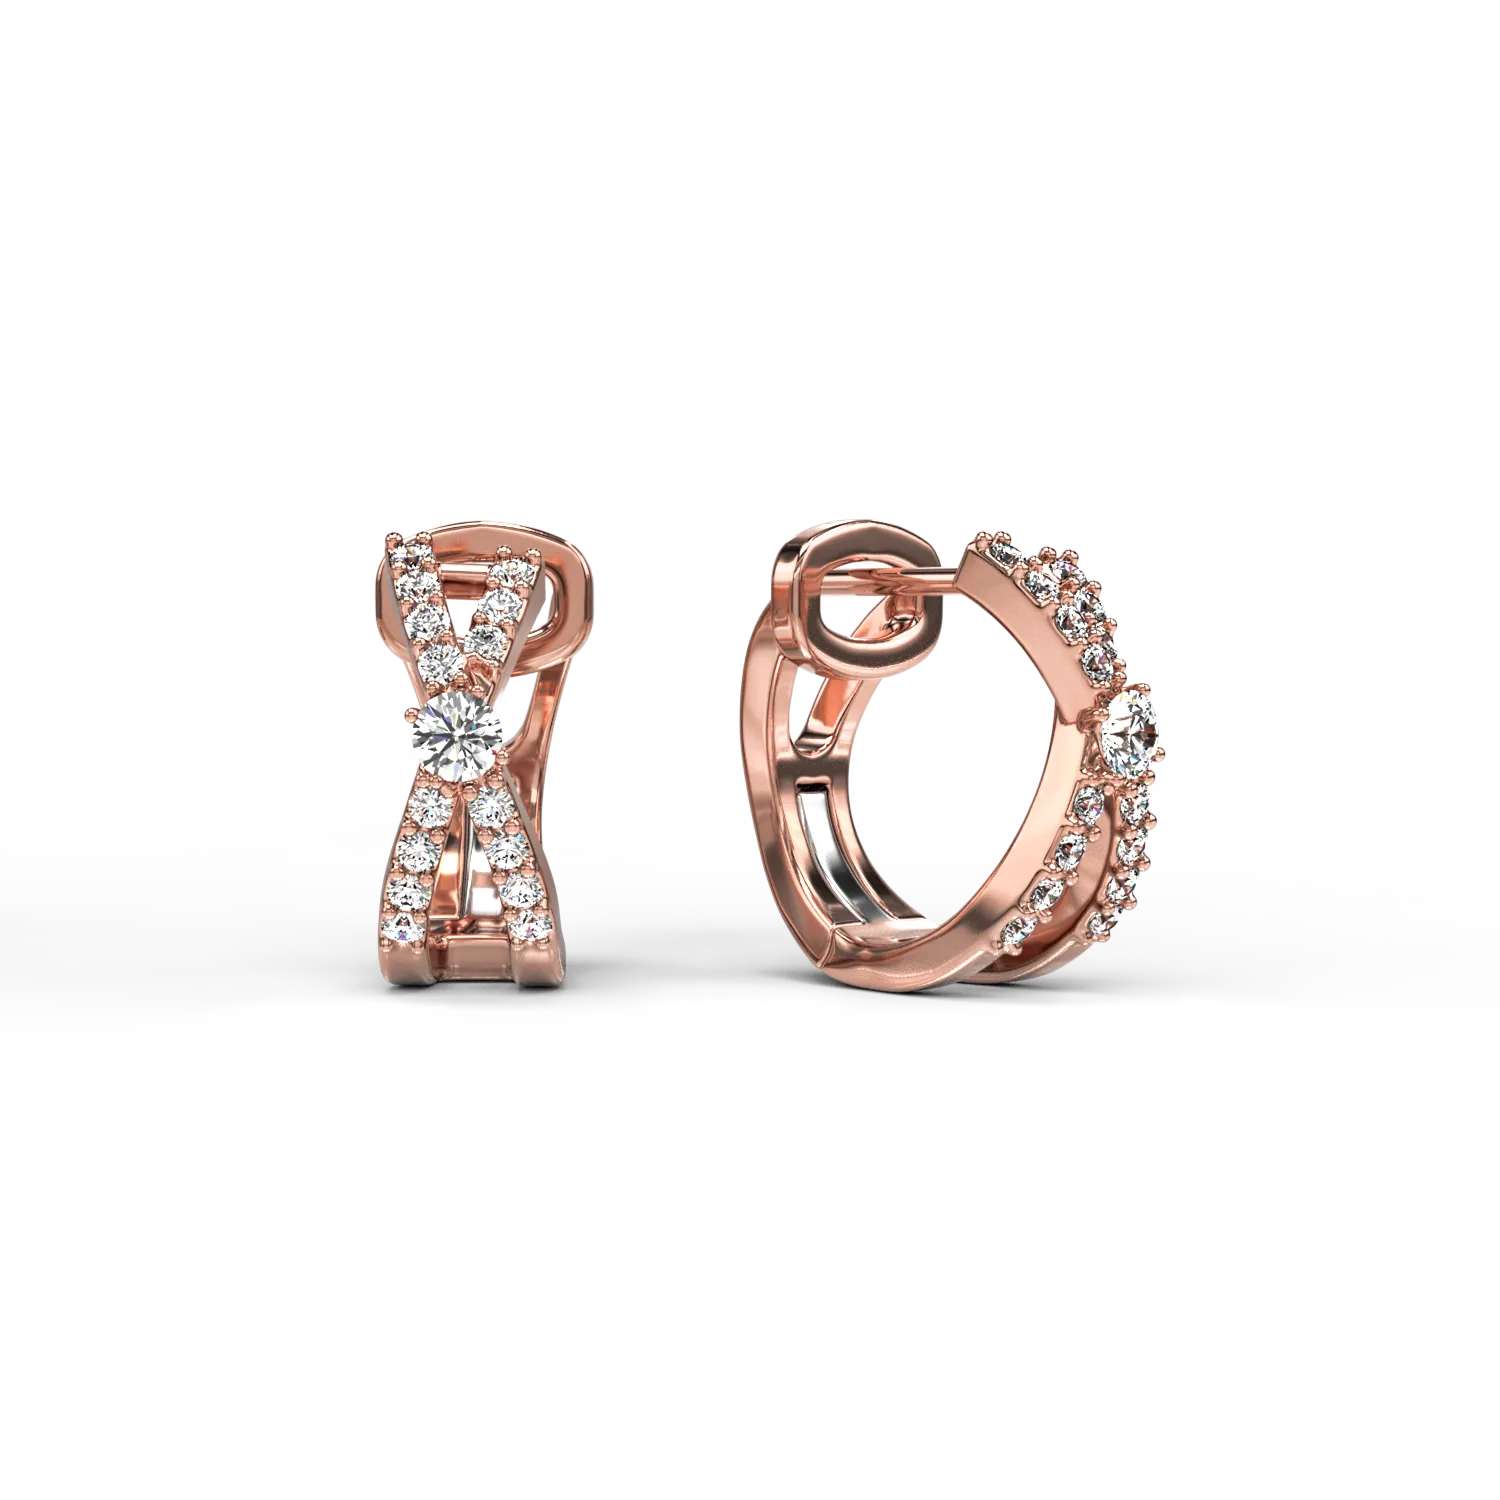 18K rose gold earrings with 0.33ct brown diamonds and 0.19ct diamonds